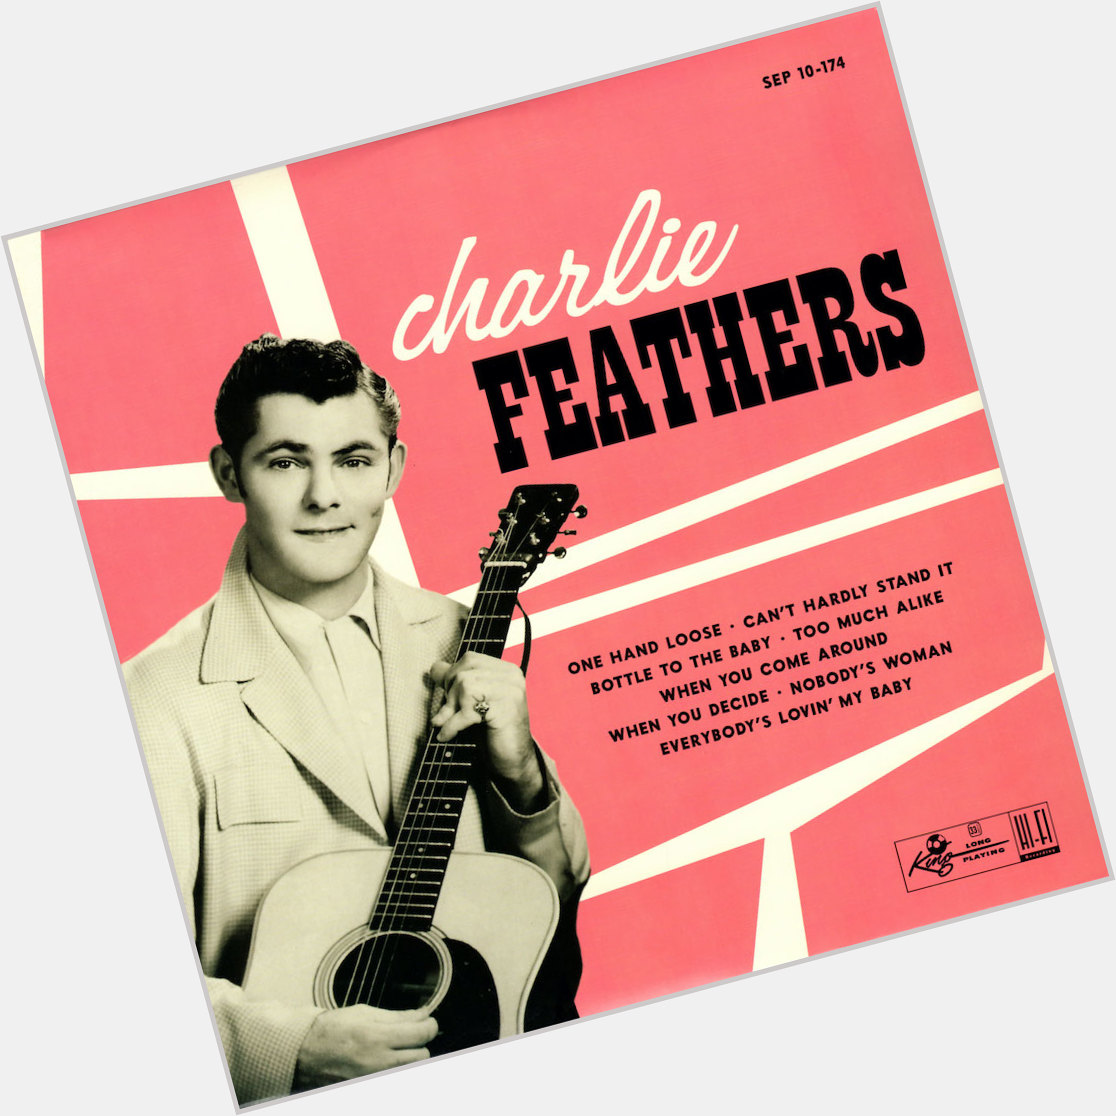 Http://fanpagepress.net/m/C/Charlie Feathers New Pic 1